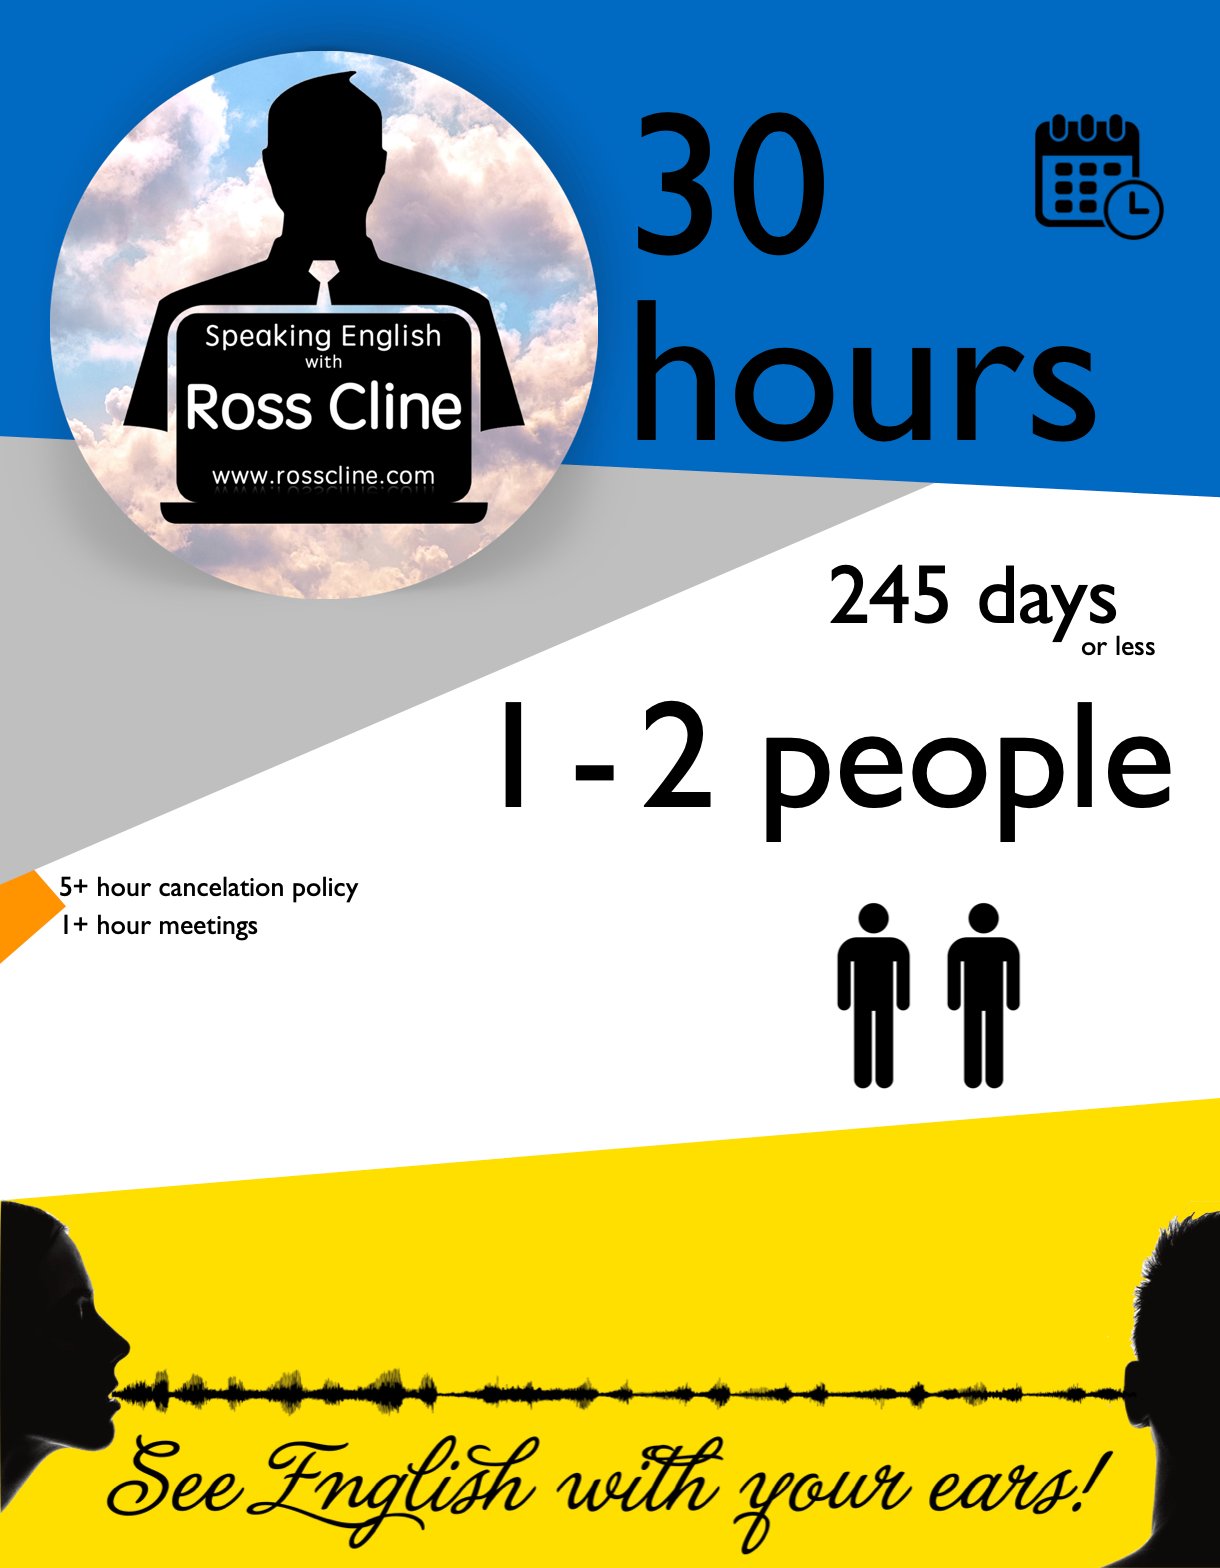 A.) 30 hours of Online Time for 1 - 2 people - www.rosscline.com